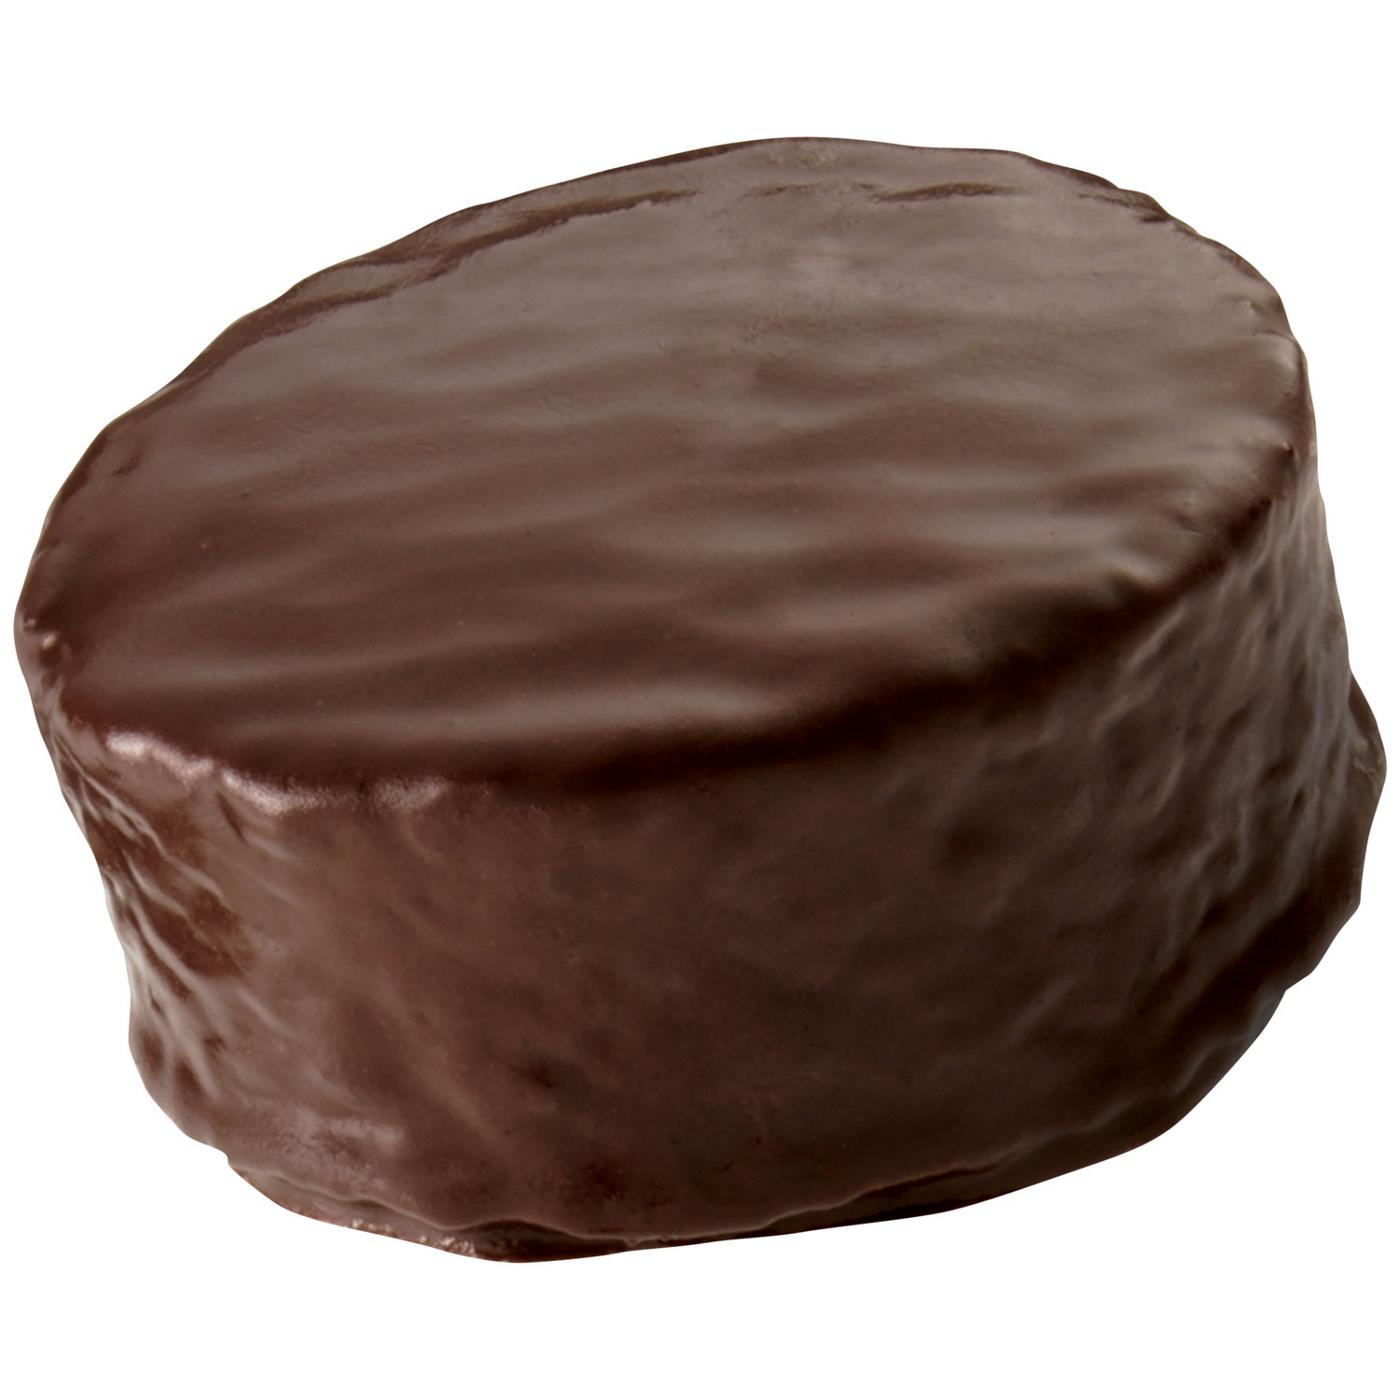 Hostess Ding Dongs Family Pack; image 2 of 7